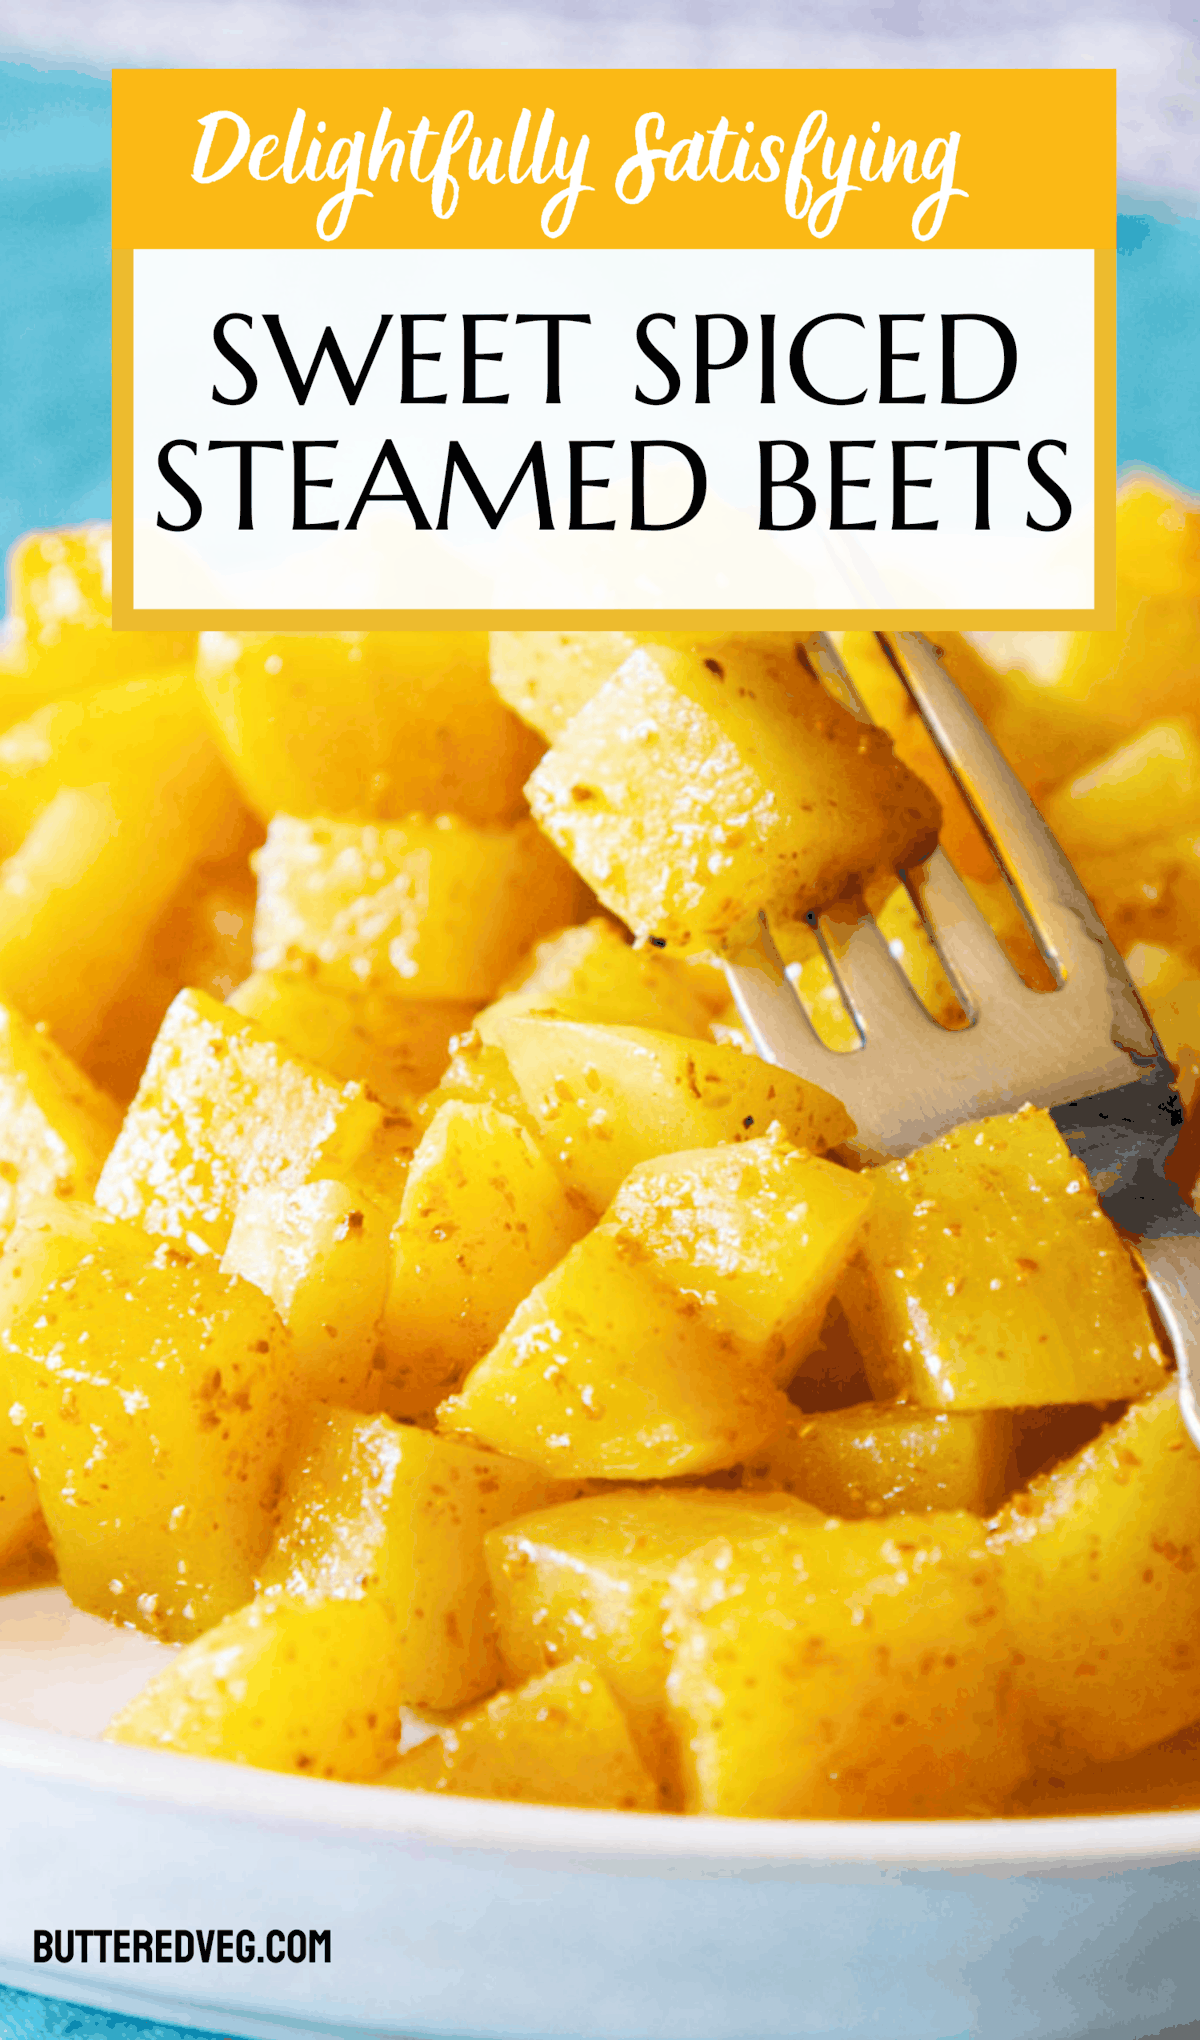 Sweet Spiced Steamed Beets